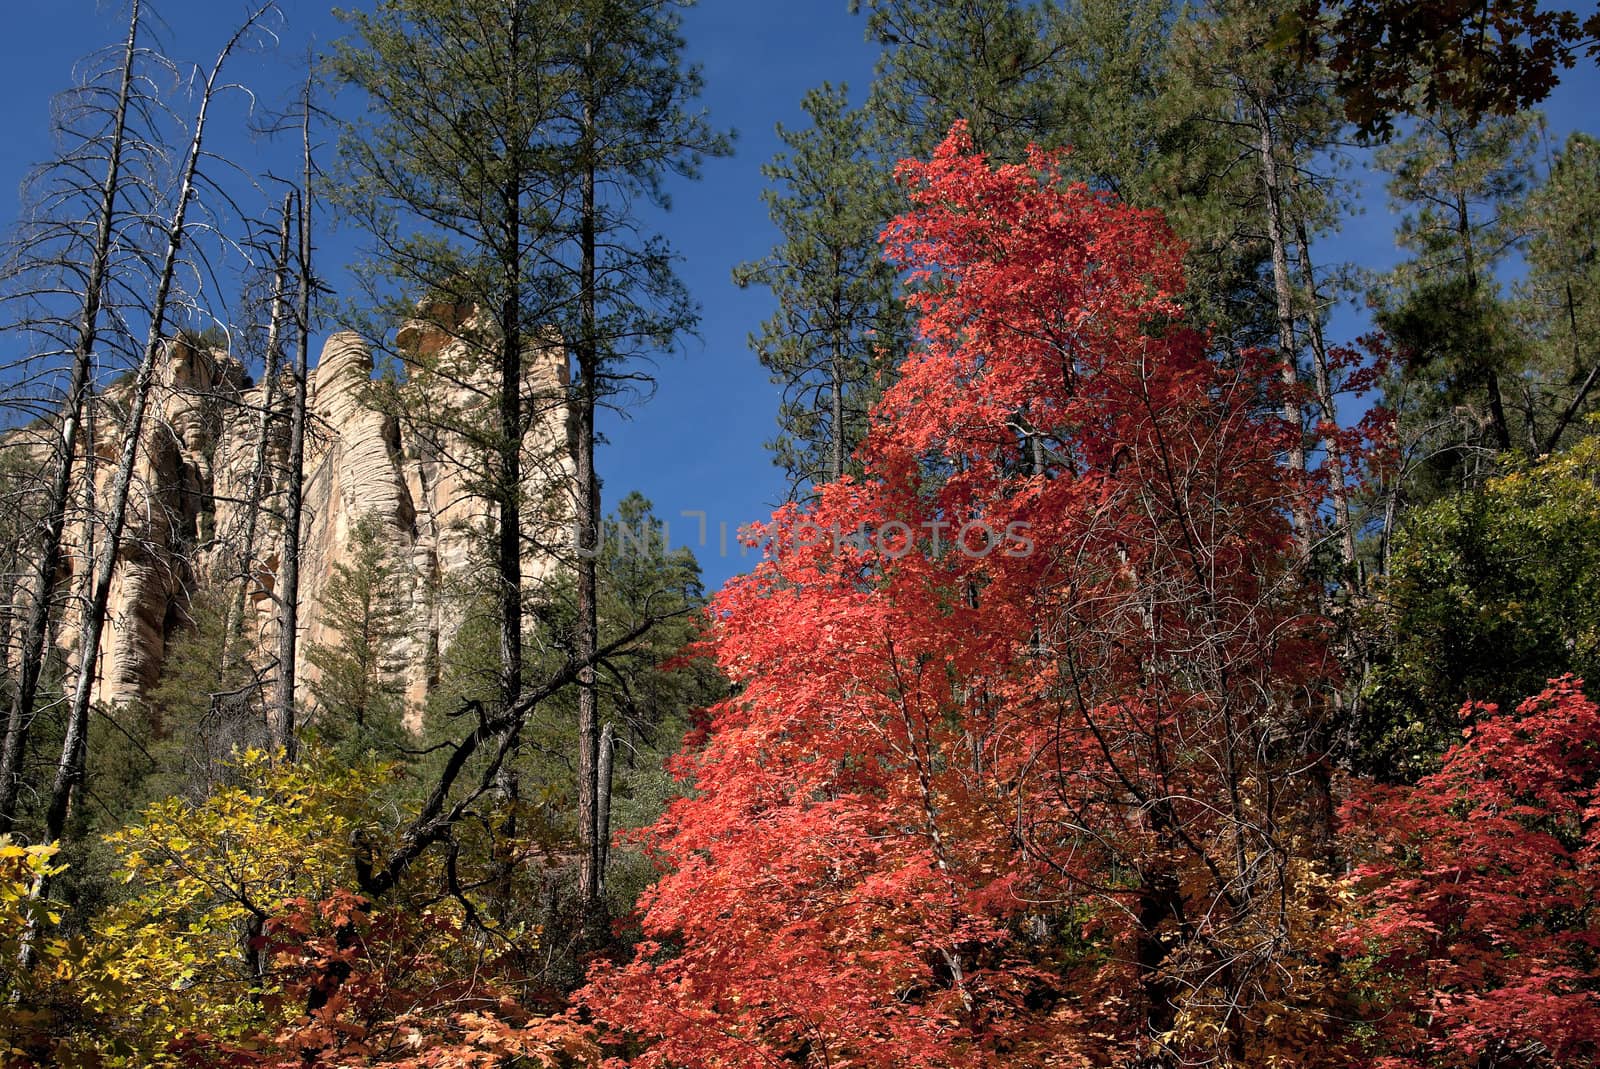 Fall colors some trees red, others yellow in forest near Sedona. by Claudine